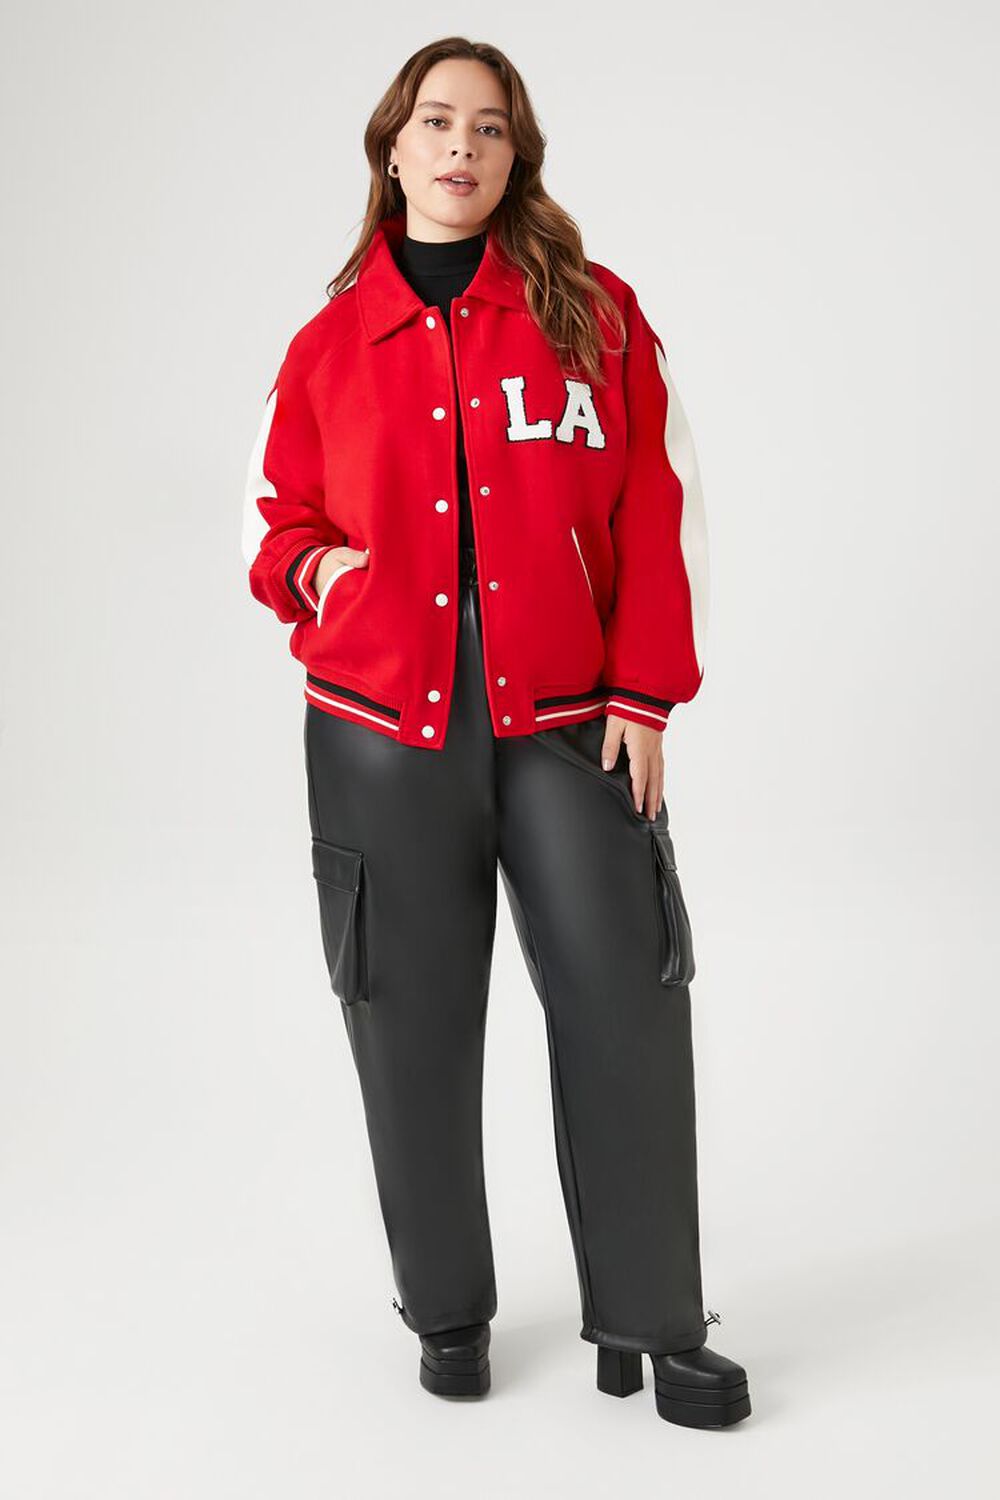 Women's Red La Graphic Front Contrast Satin Bomber Jacket - Size M